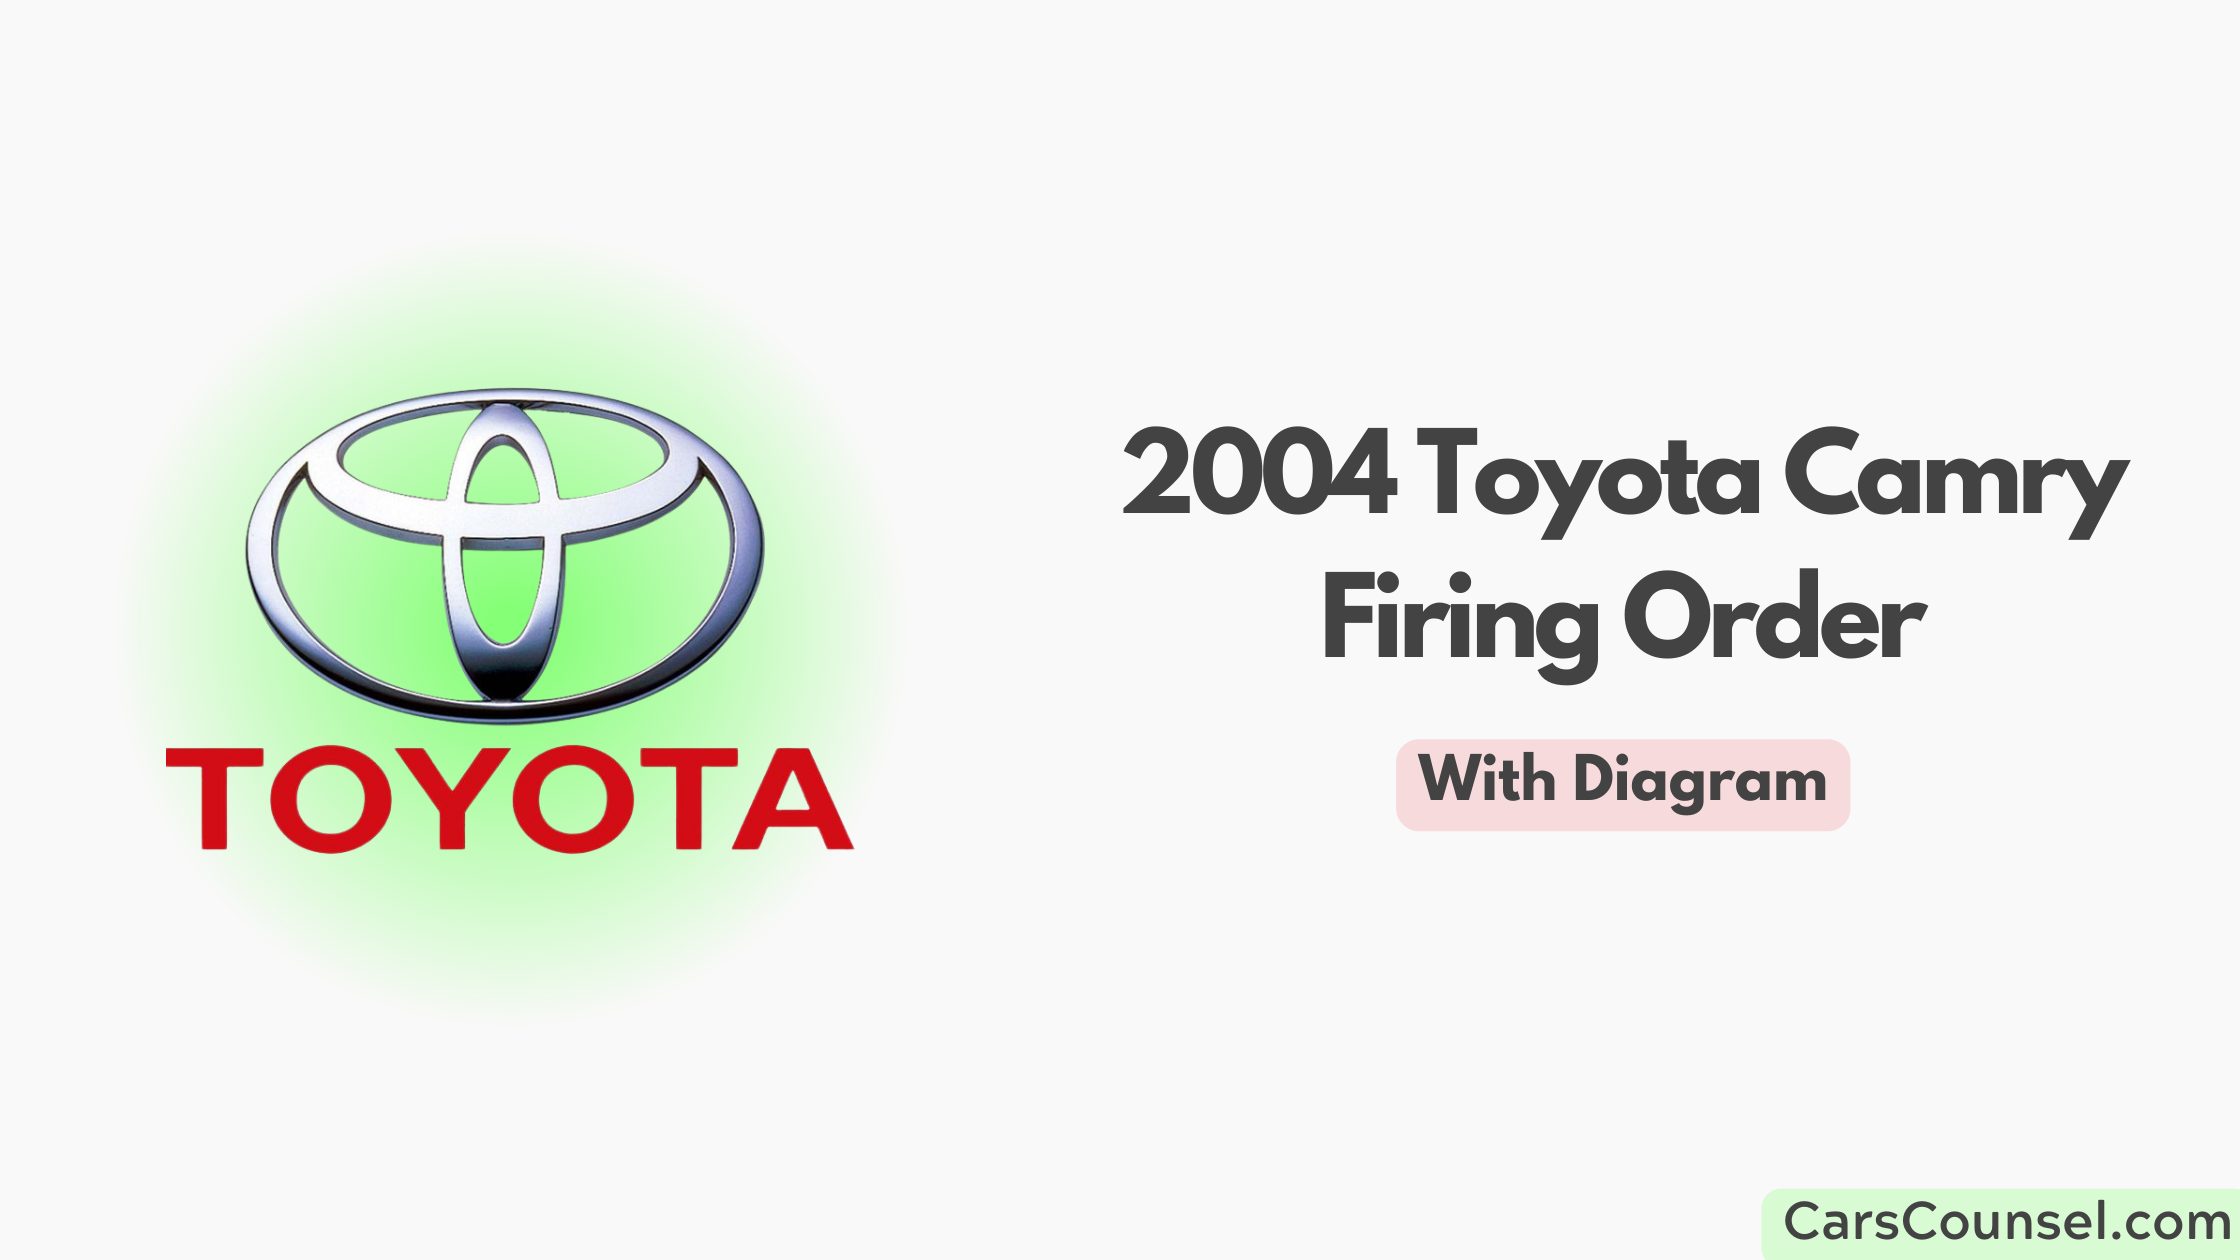 2004 Toyota Camry Firing Order With Diagram